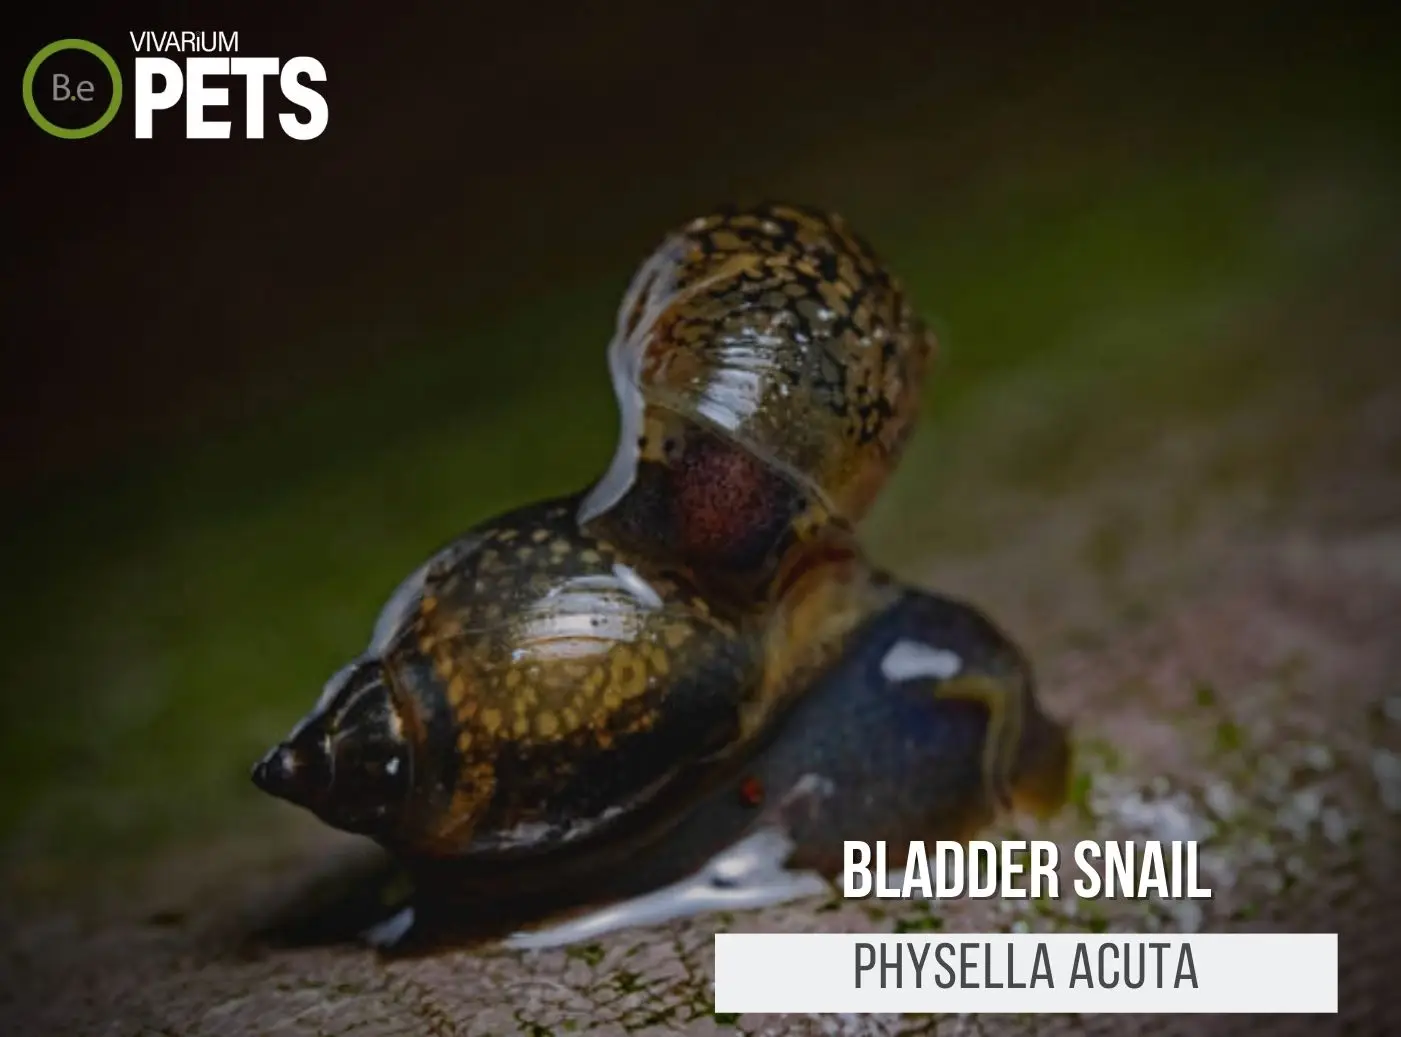 The Ultimate Physella acuta "Bladder snail" Care Guide!